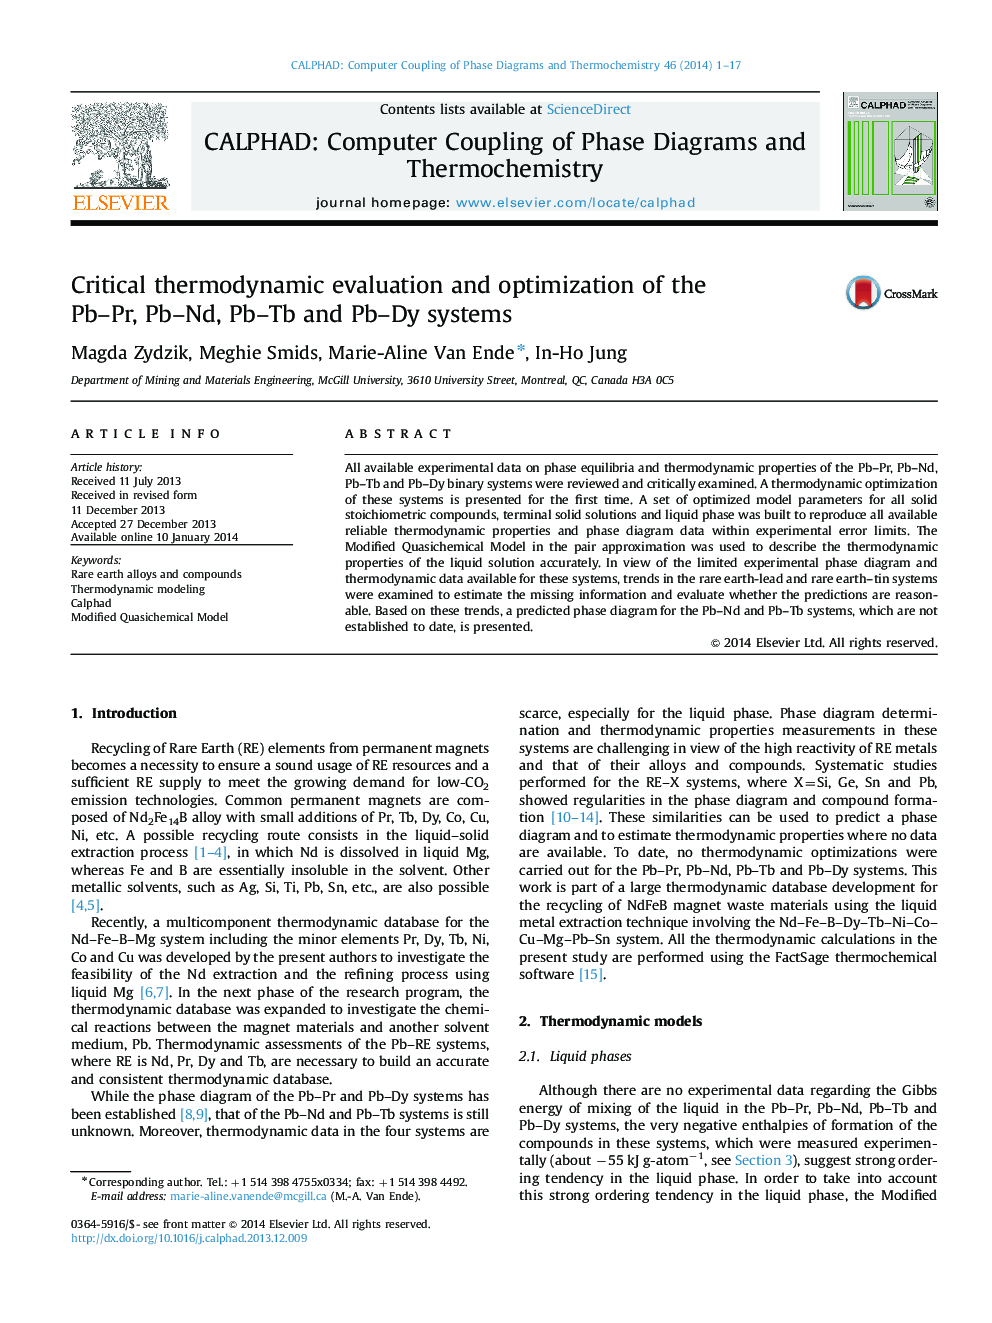 Critical thermodynamic evaluation and optimization of the Pb-Pr, Pb-Nd, Pb-Tb and Pb-Dy systems